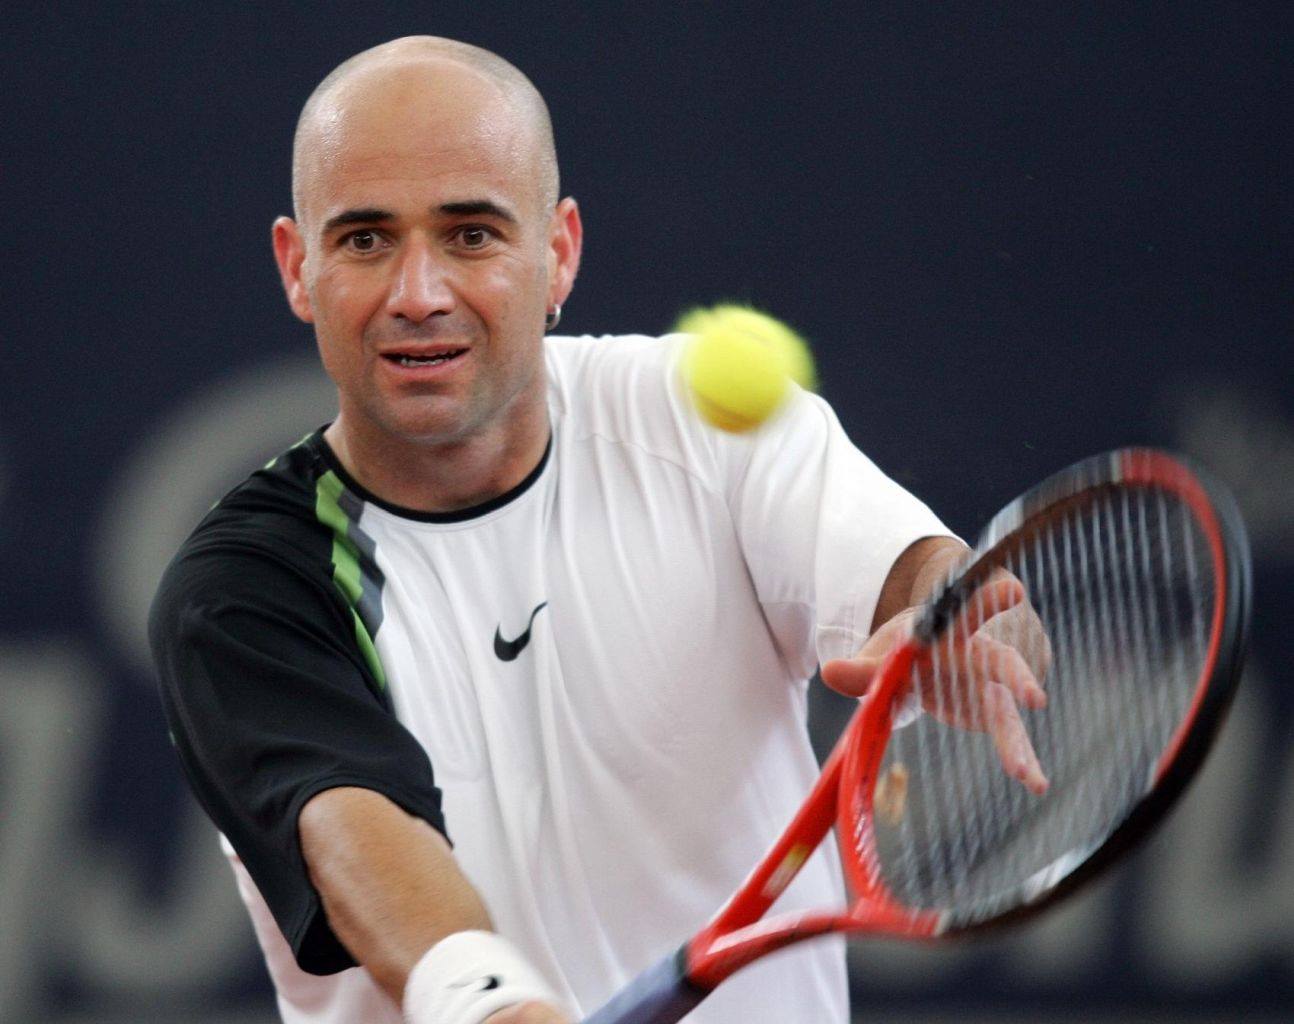 Happy Birthday to Andre Agassi who turns 49 today! 